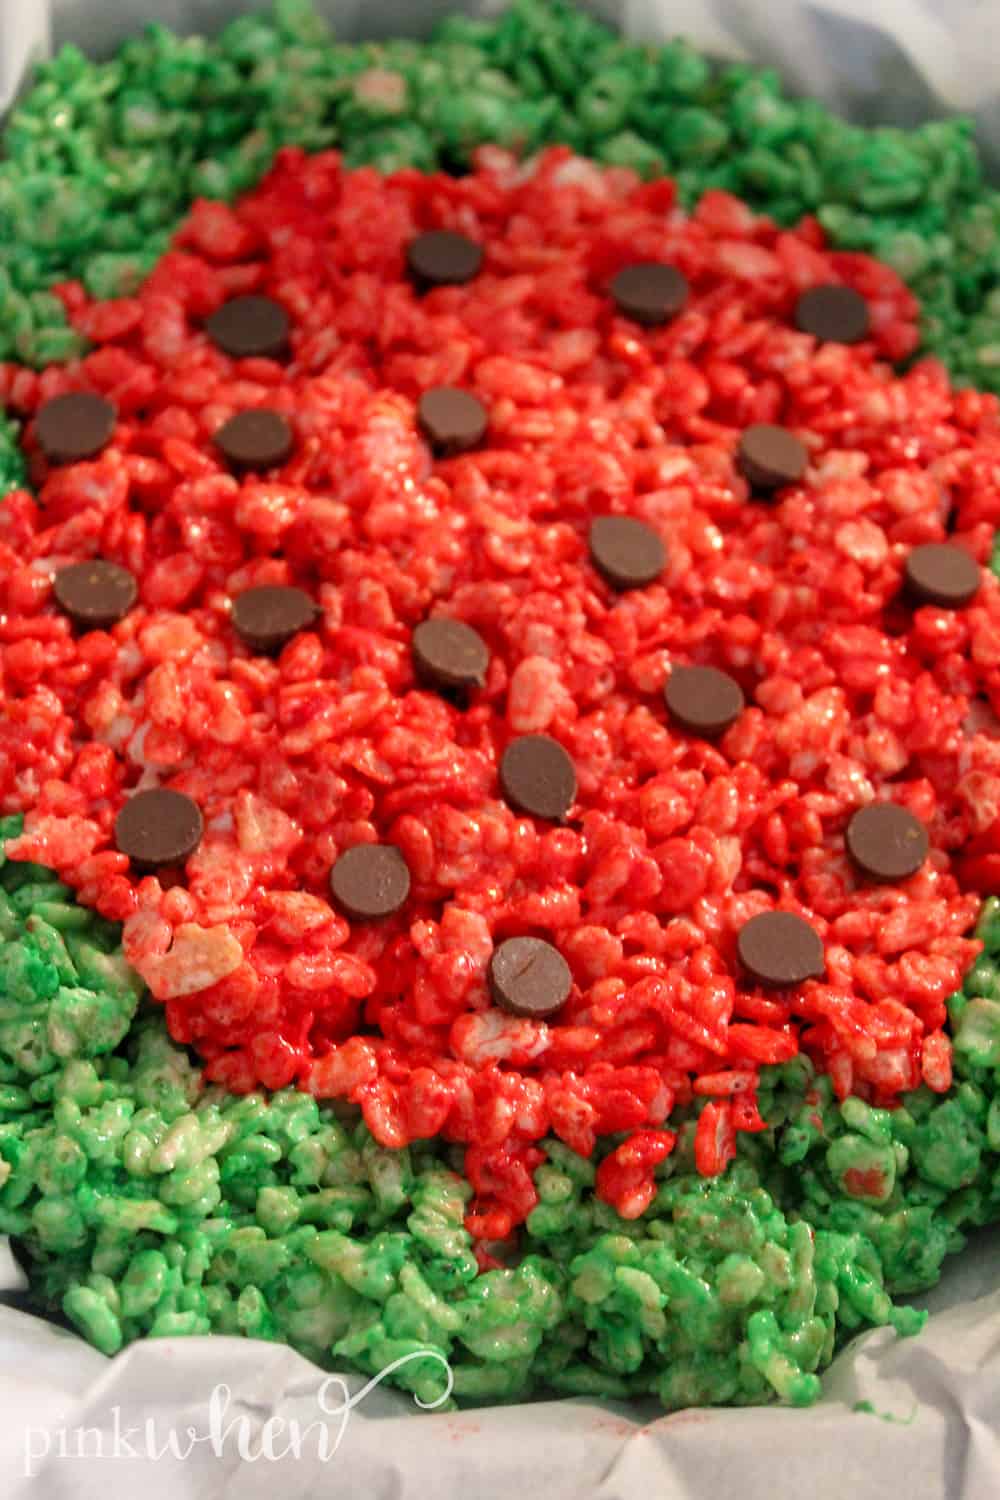 This is a new favorite no bake dessert that has been a hit in our household! These watermelon rice krispie treats are gooey, sweet, delicious, and so much fun! They are sure to be a huge hit with the kids and they will have a blast making them.